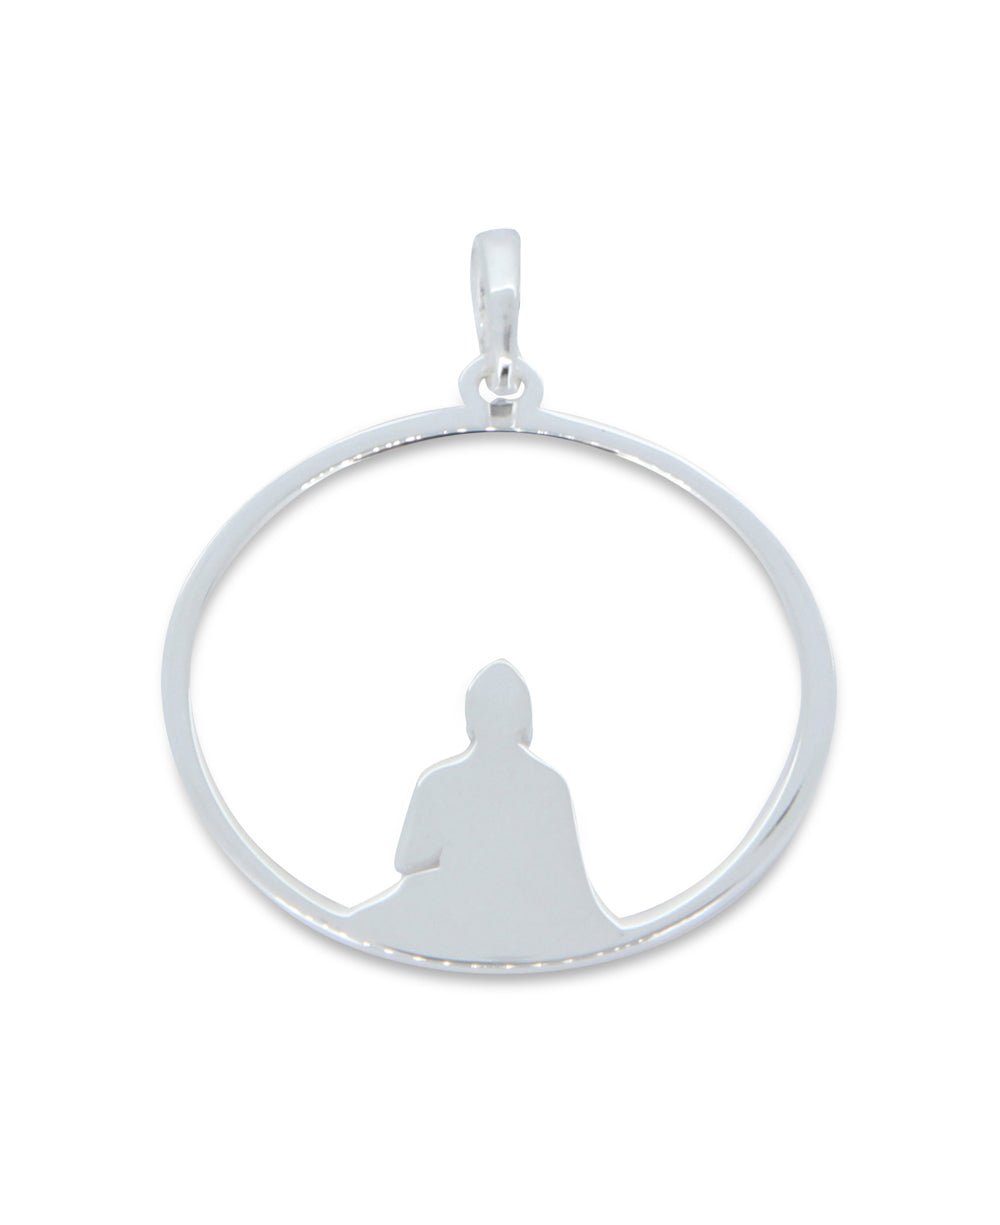 Sterling Silver Abstract Meditating Silhouette Pendant - Charms & Pendants - -